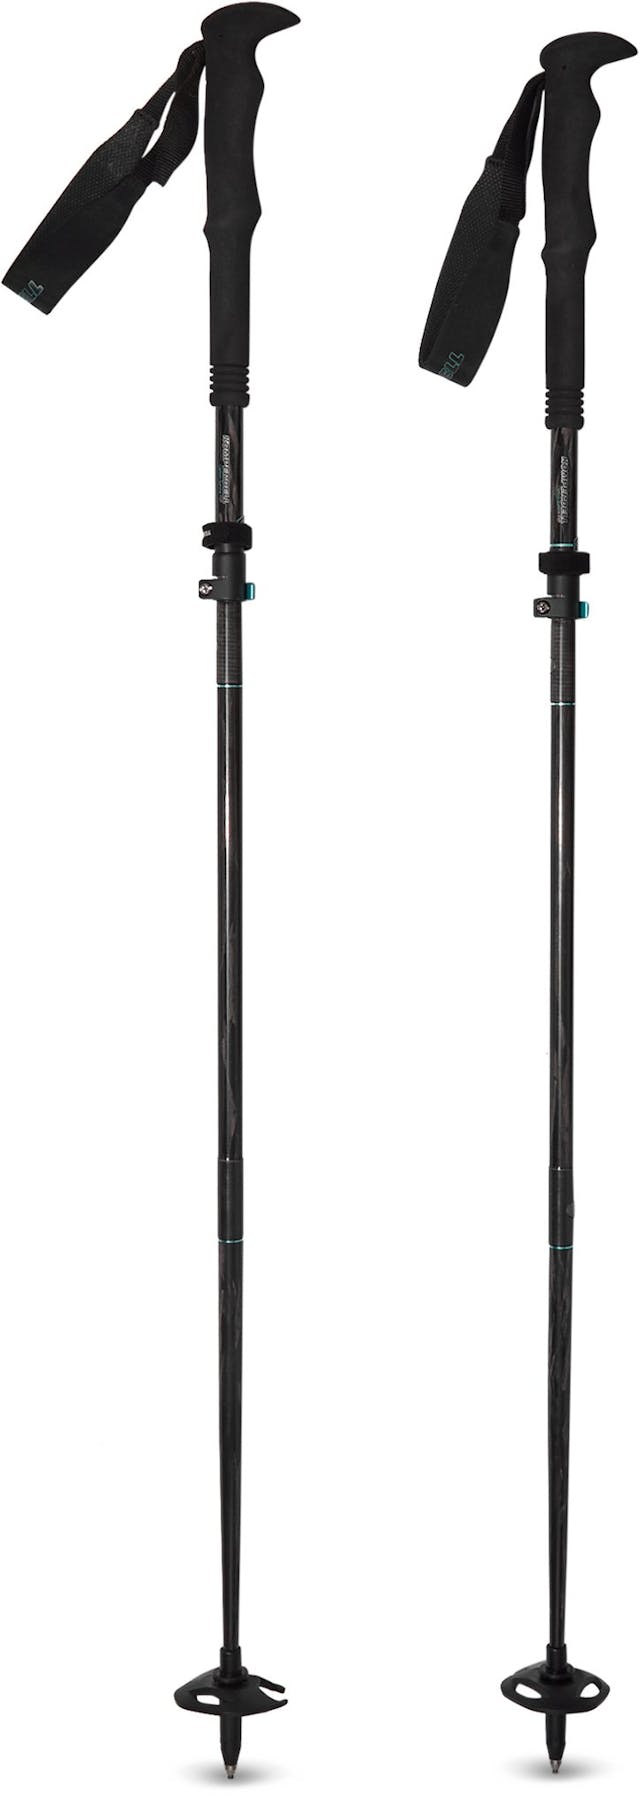 Product image for Carbon Fxp.4 Summit - Vario Compact Ski Pole